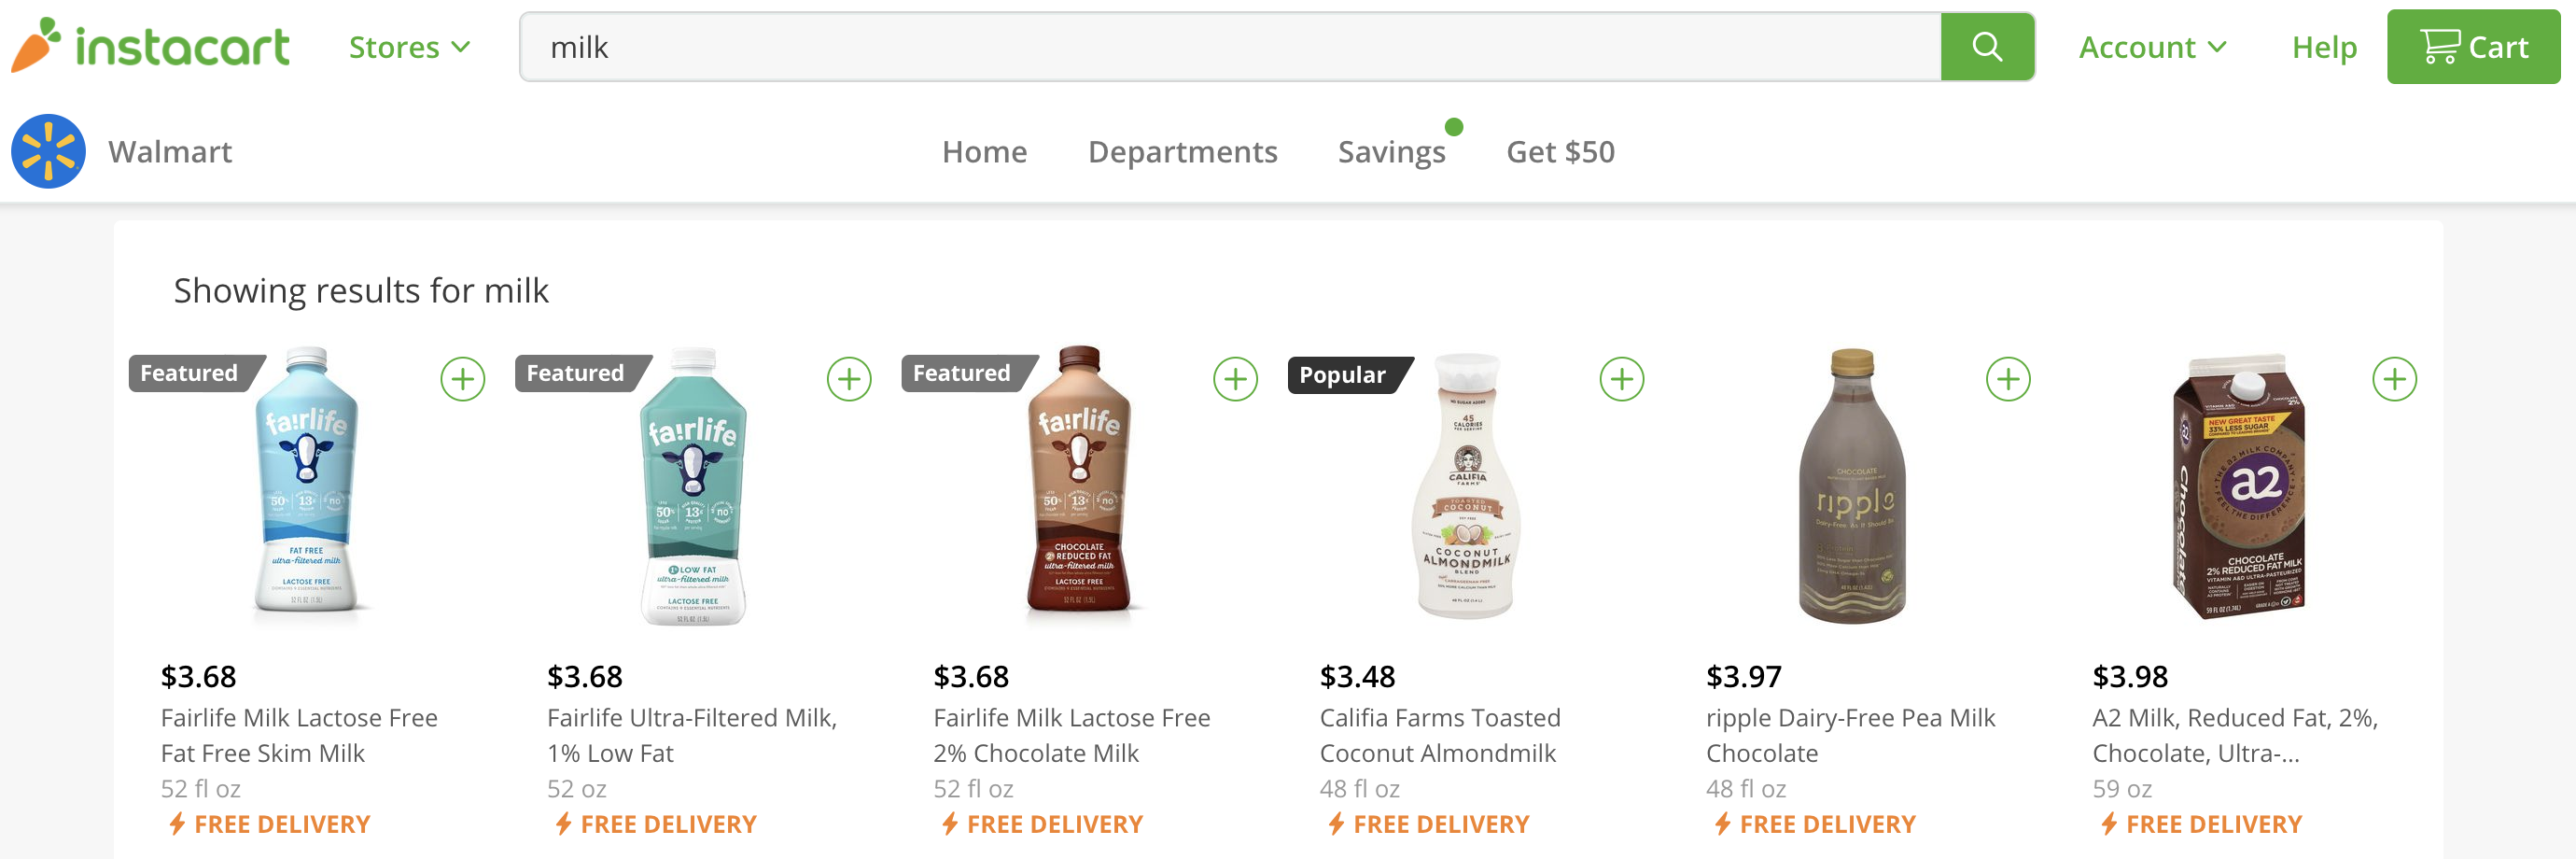 Instacart-Guide-Search.png